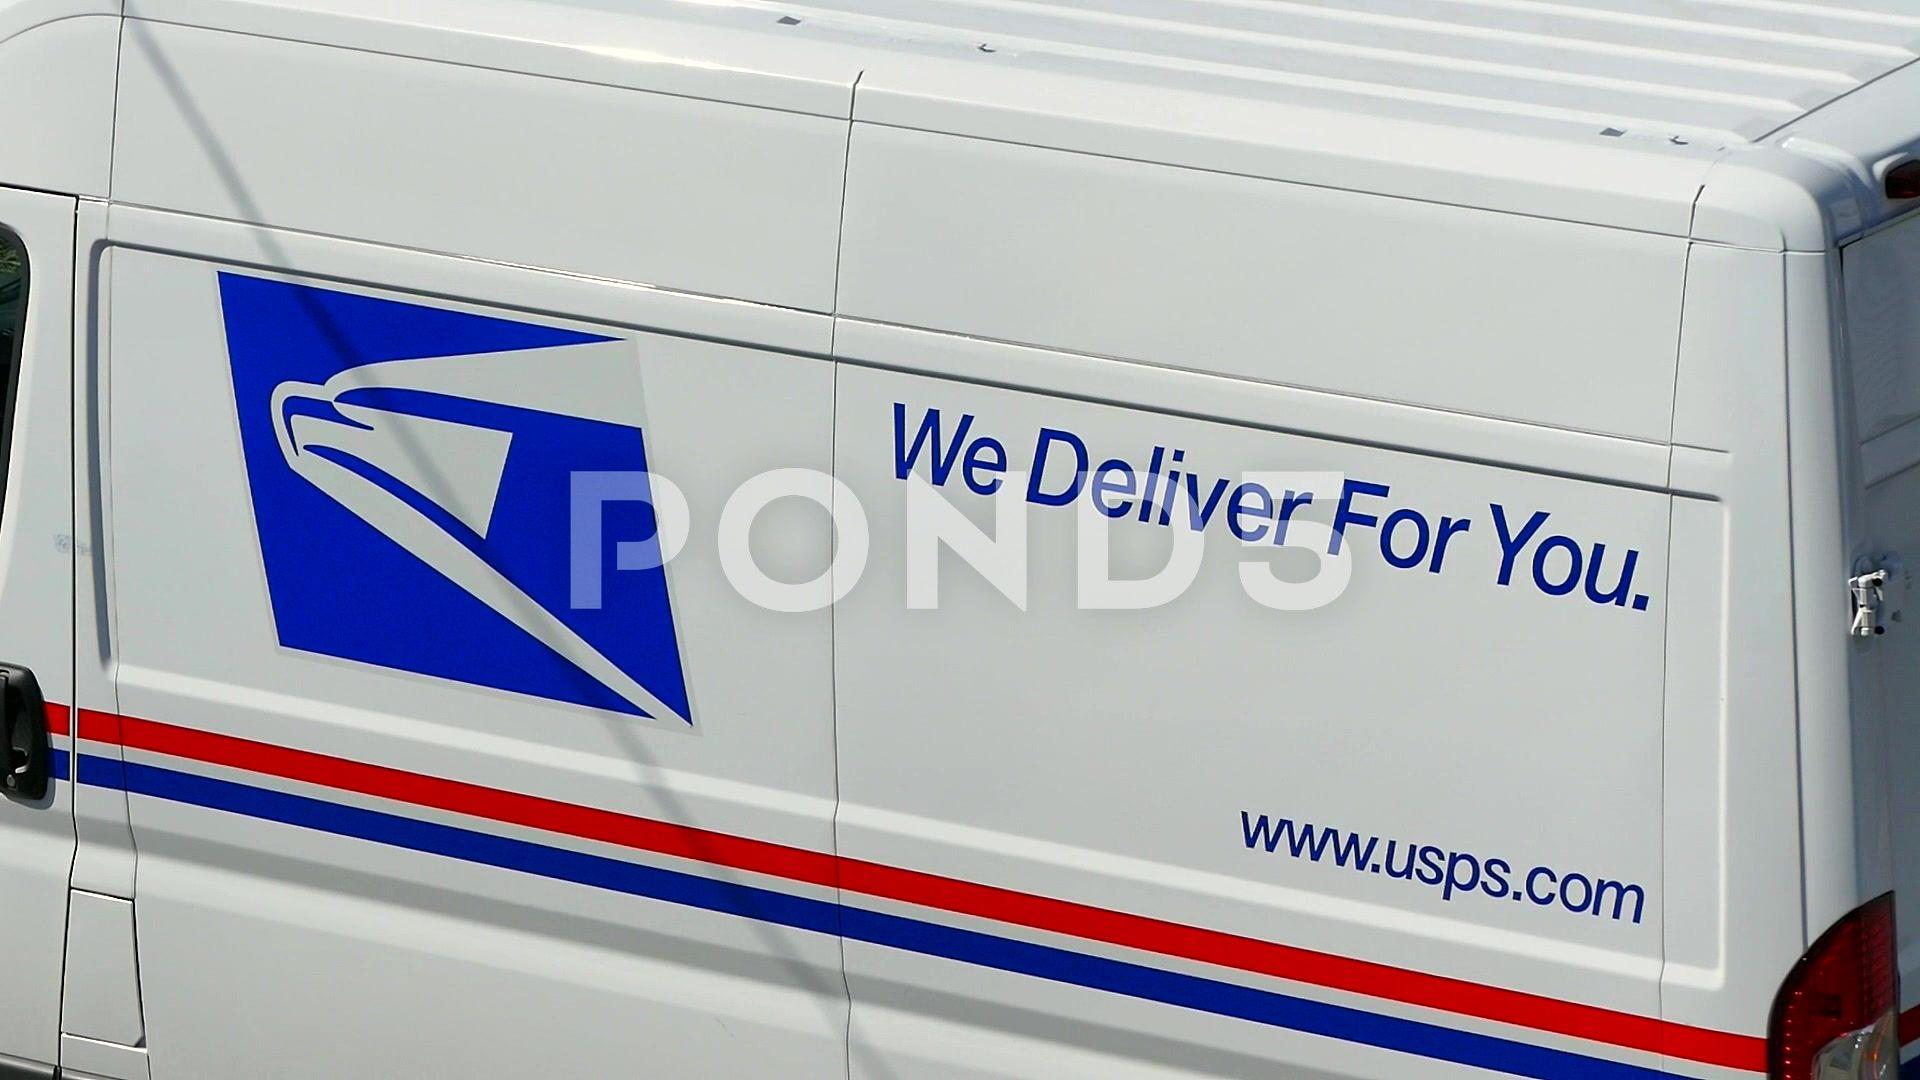 Mail Truck Logo - Post Office truck logo, mail delivery zoom out ~ Footage #60859618